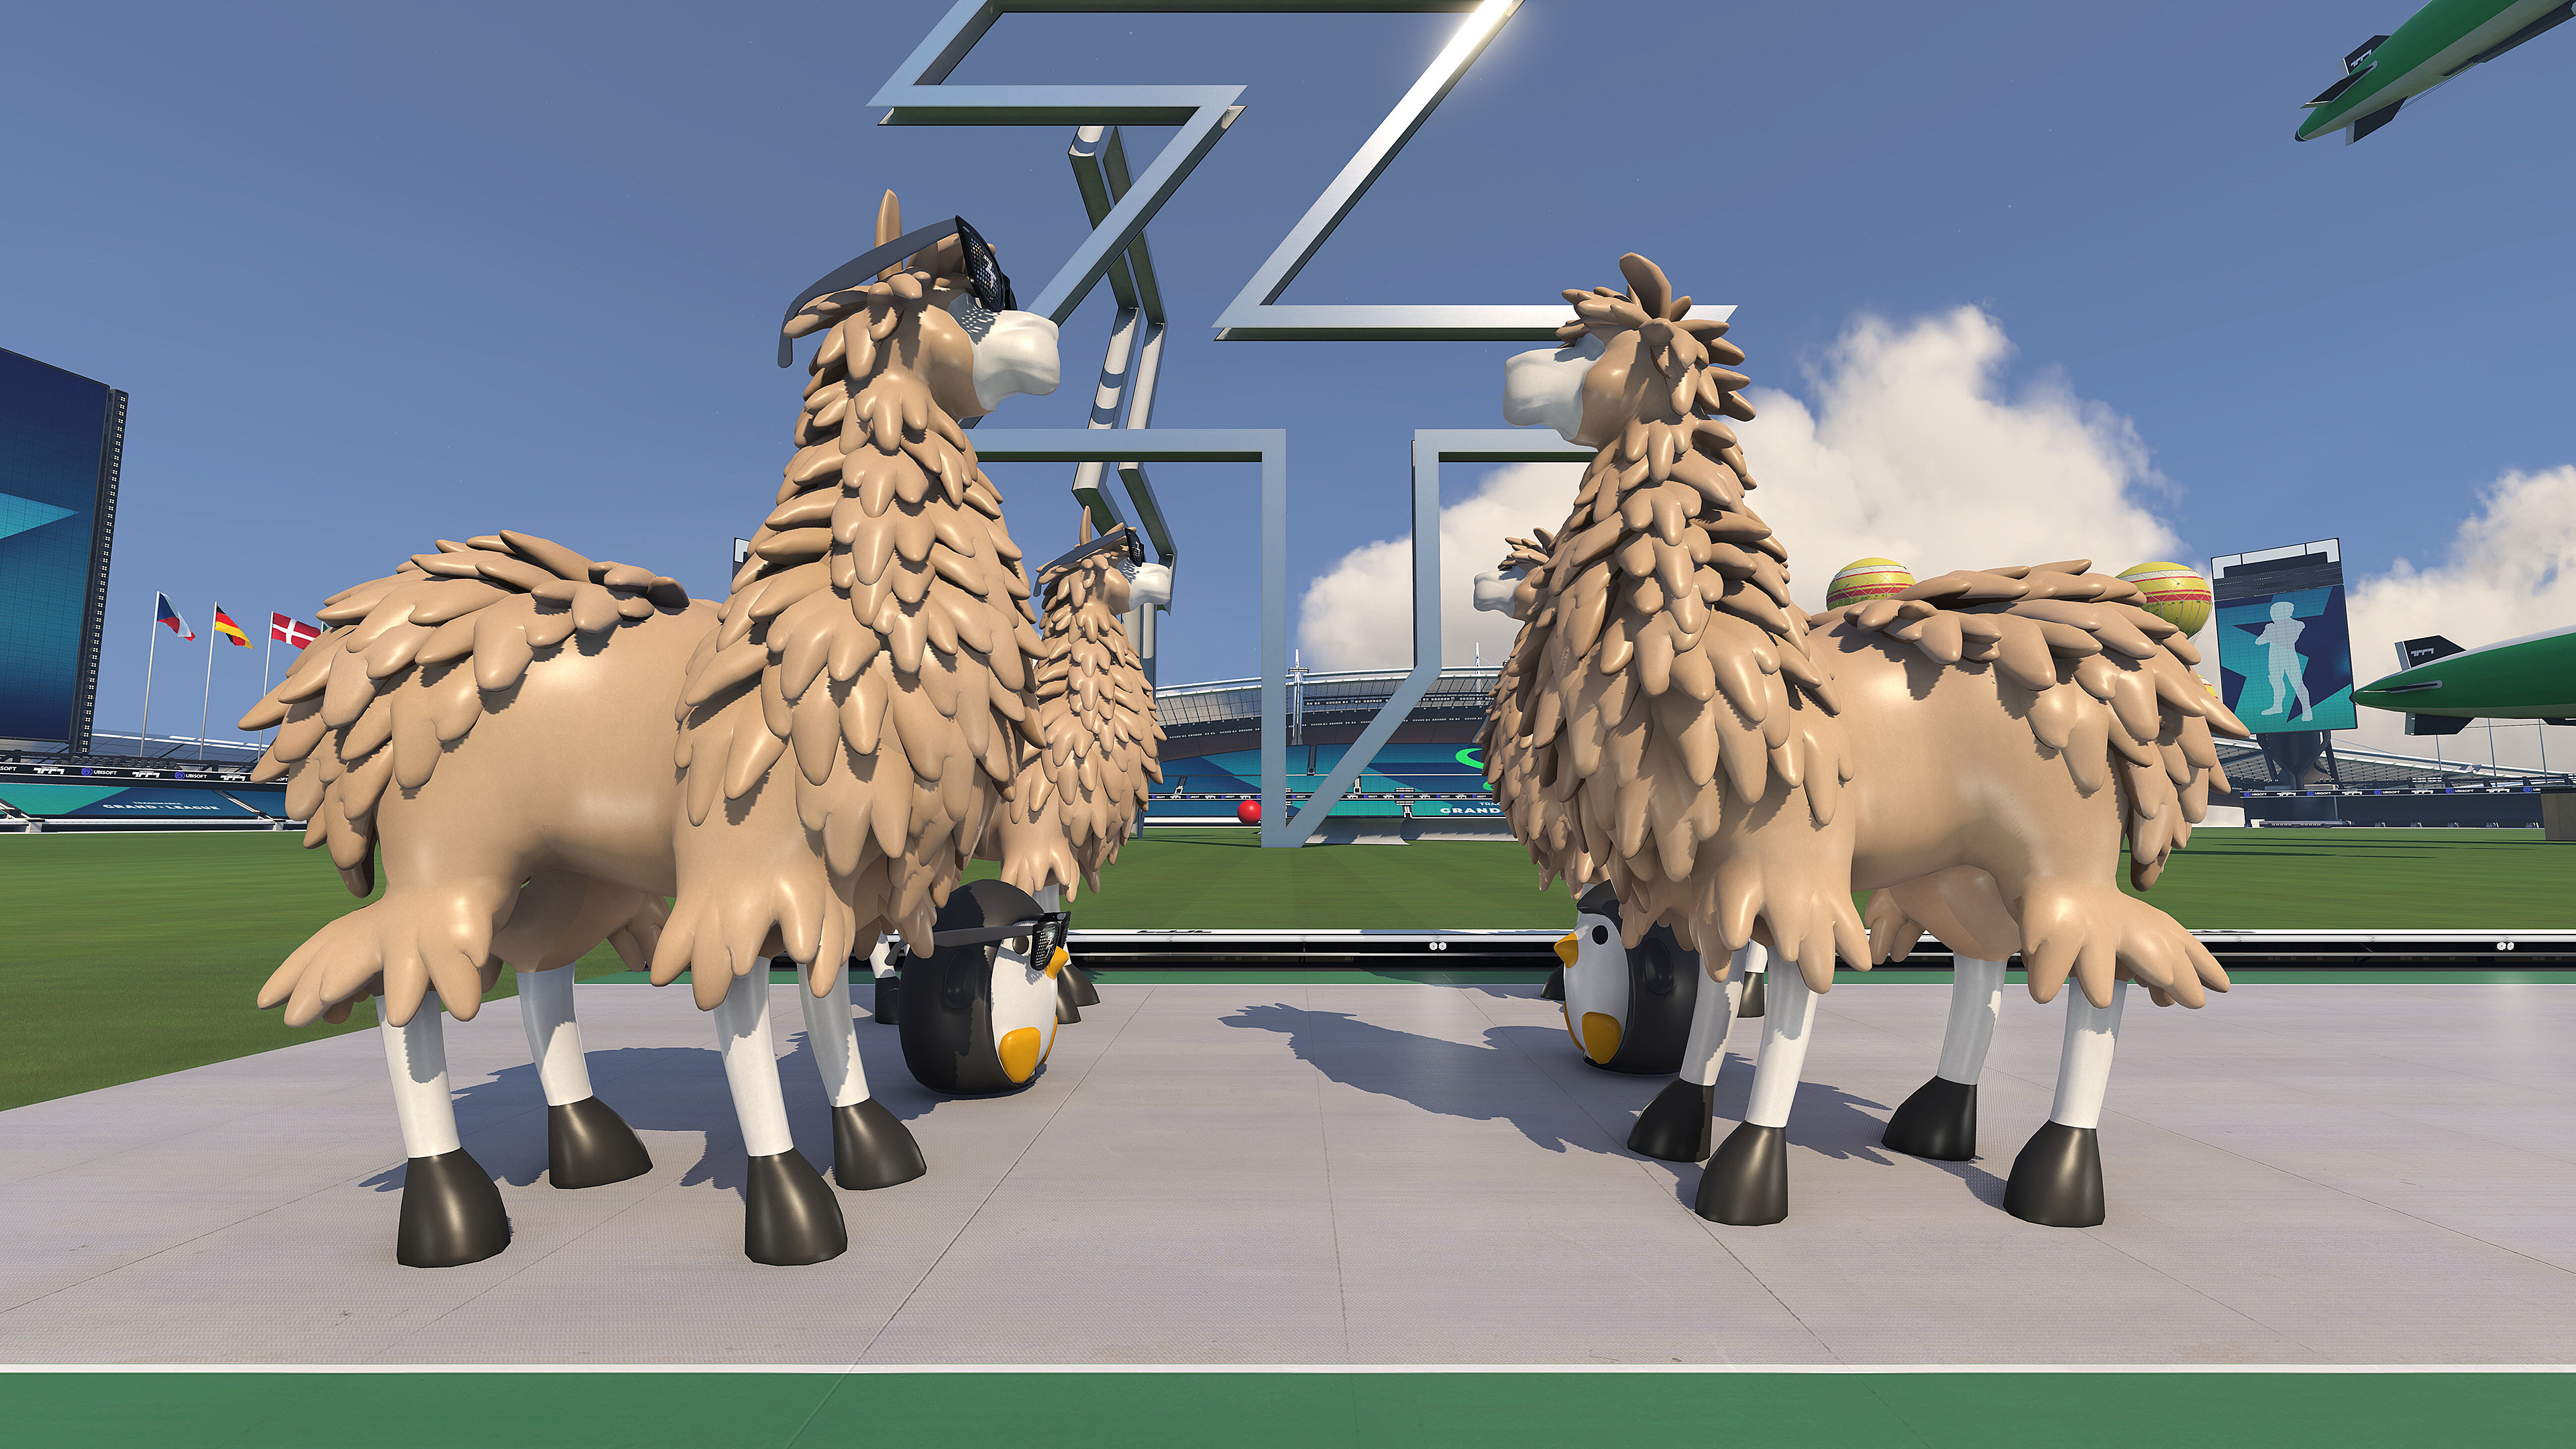 In-Game Screenshot of Zerator's Lama. [He do own a game company called "Unexpected Studio" and they made a game called "As far As The Eyes". So as an Easter Egg we re-made their Lama in a Nadeo's style.] 